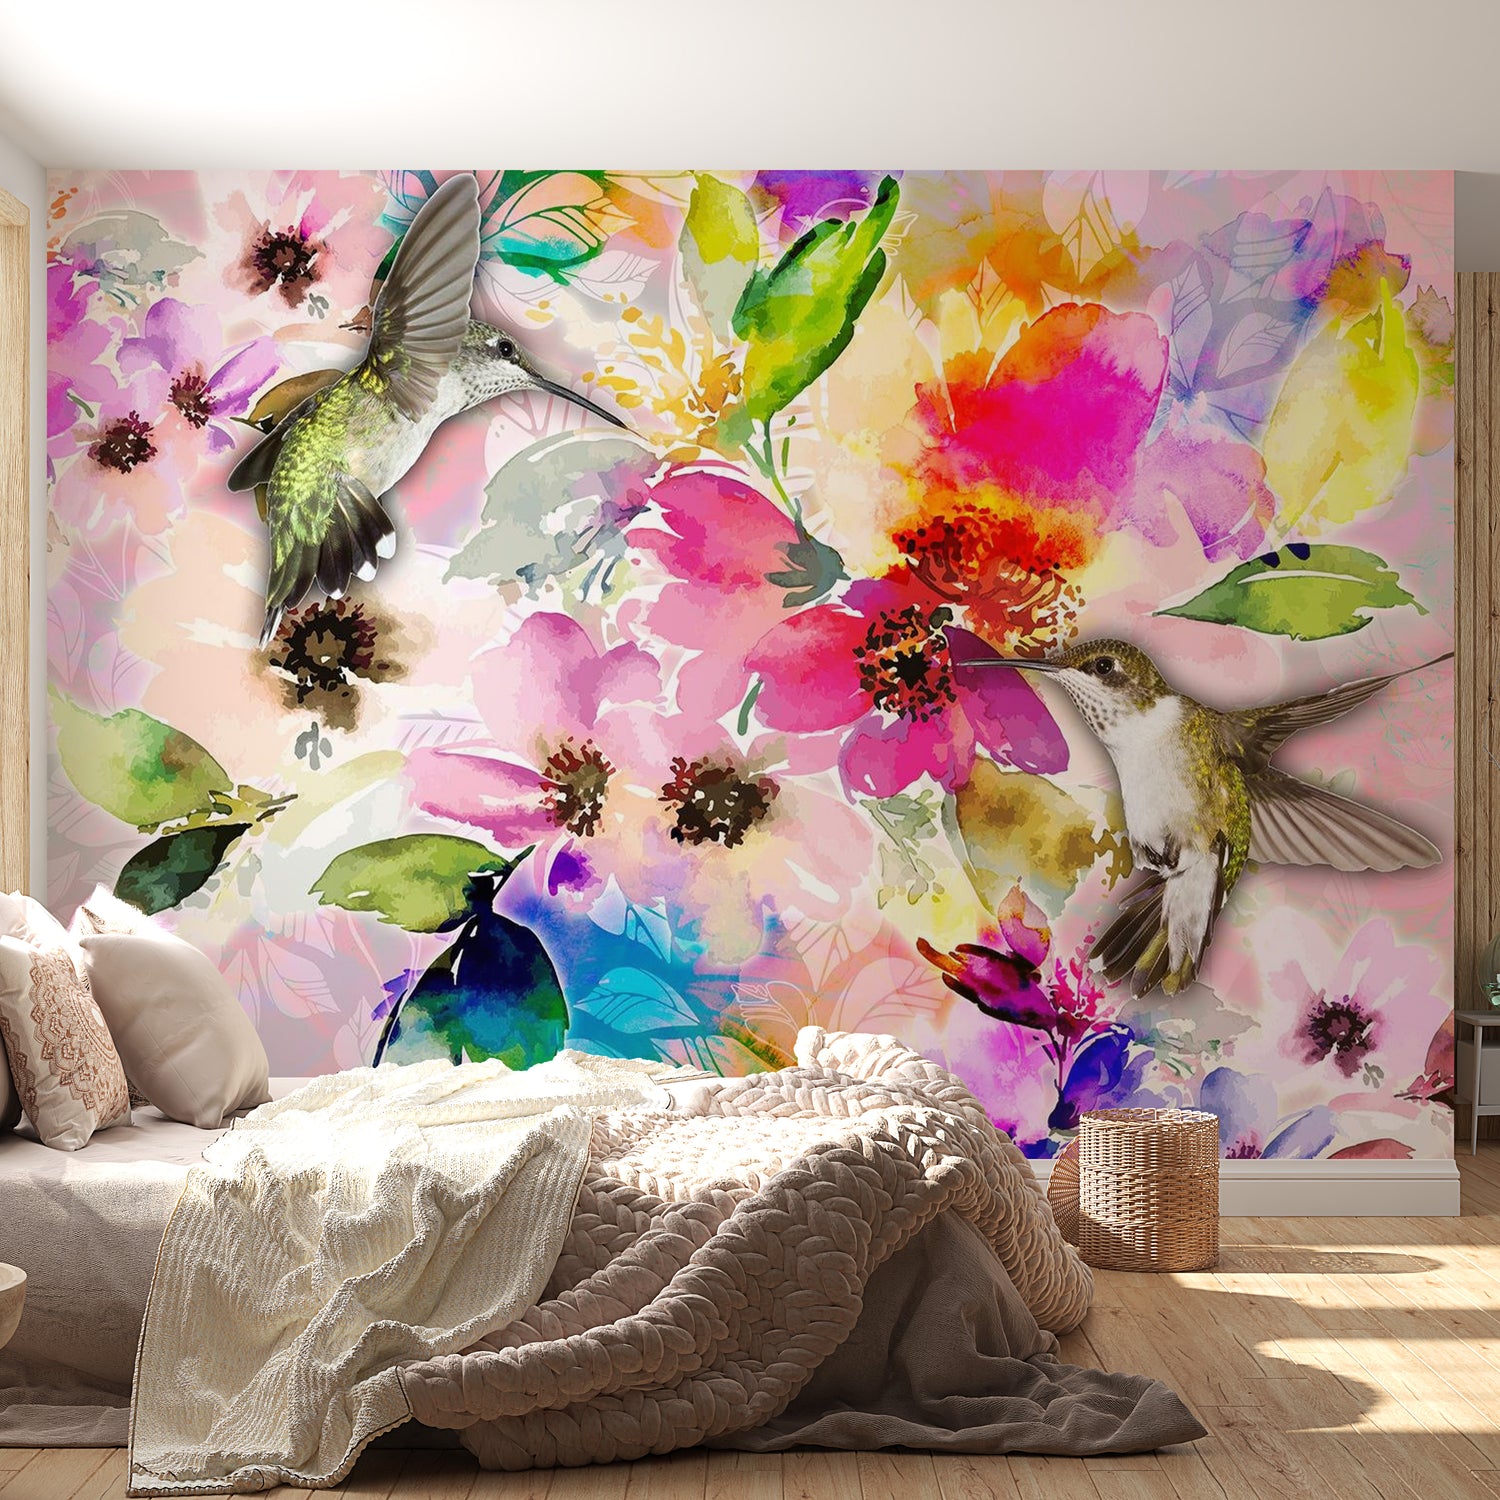 Peel & Stick Animal Wall Mural - Hummingbirds and Flowers - Removable Wall Decals